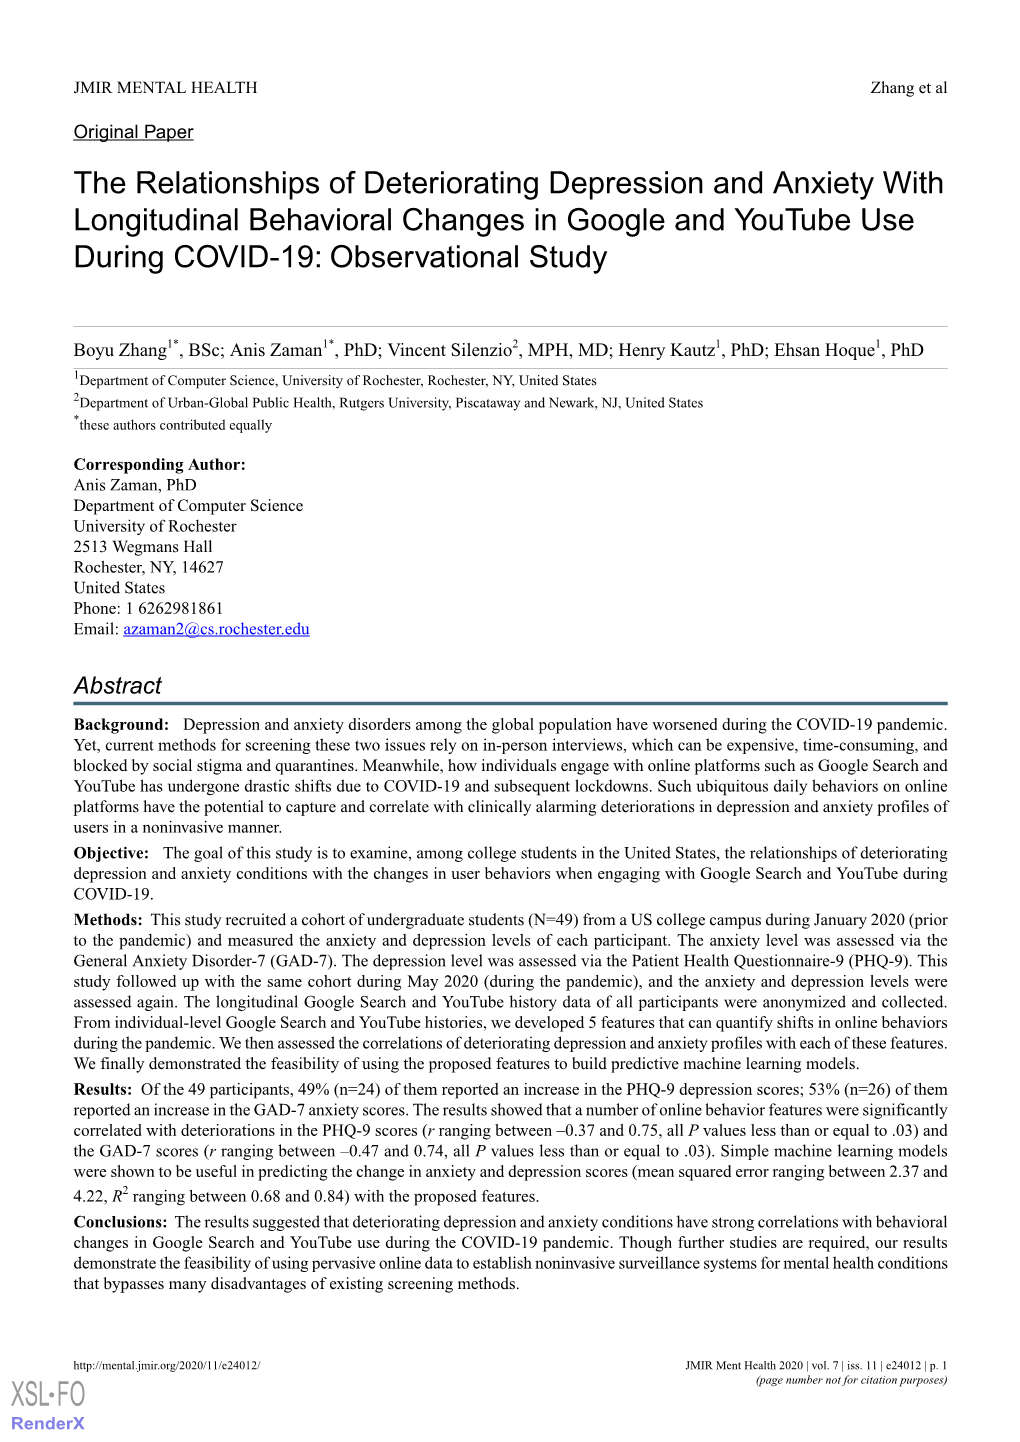 The Relationships of Deteriorating Depression and Anxiety with Longitudinal Behavioral Changes in Google and Youtube Use During COVID-19: Observational Study